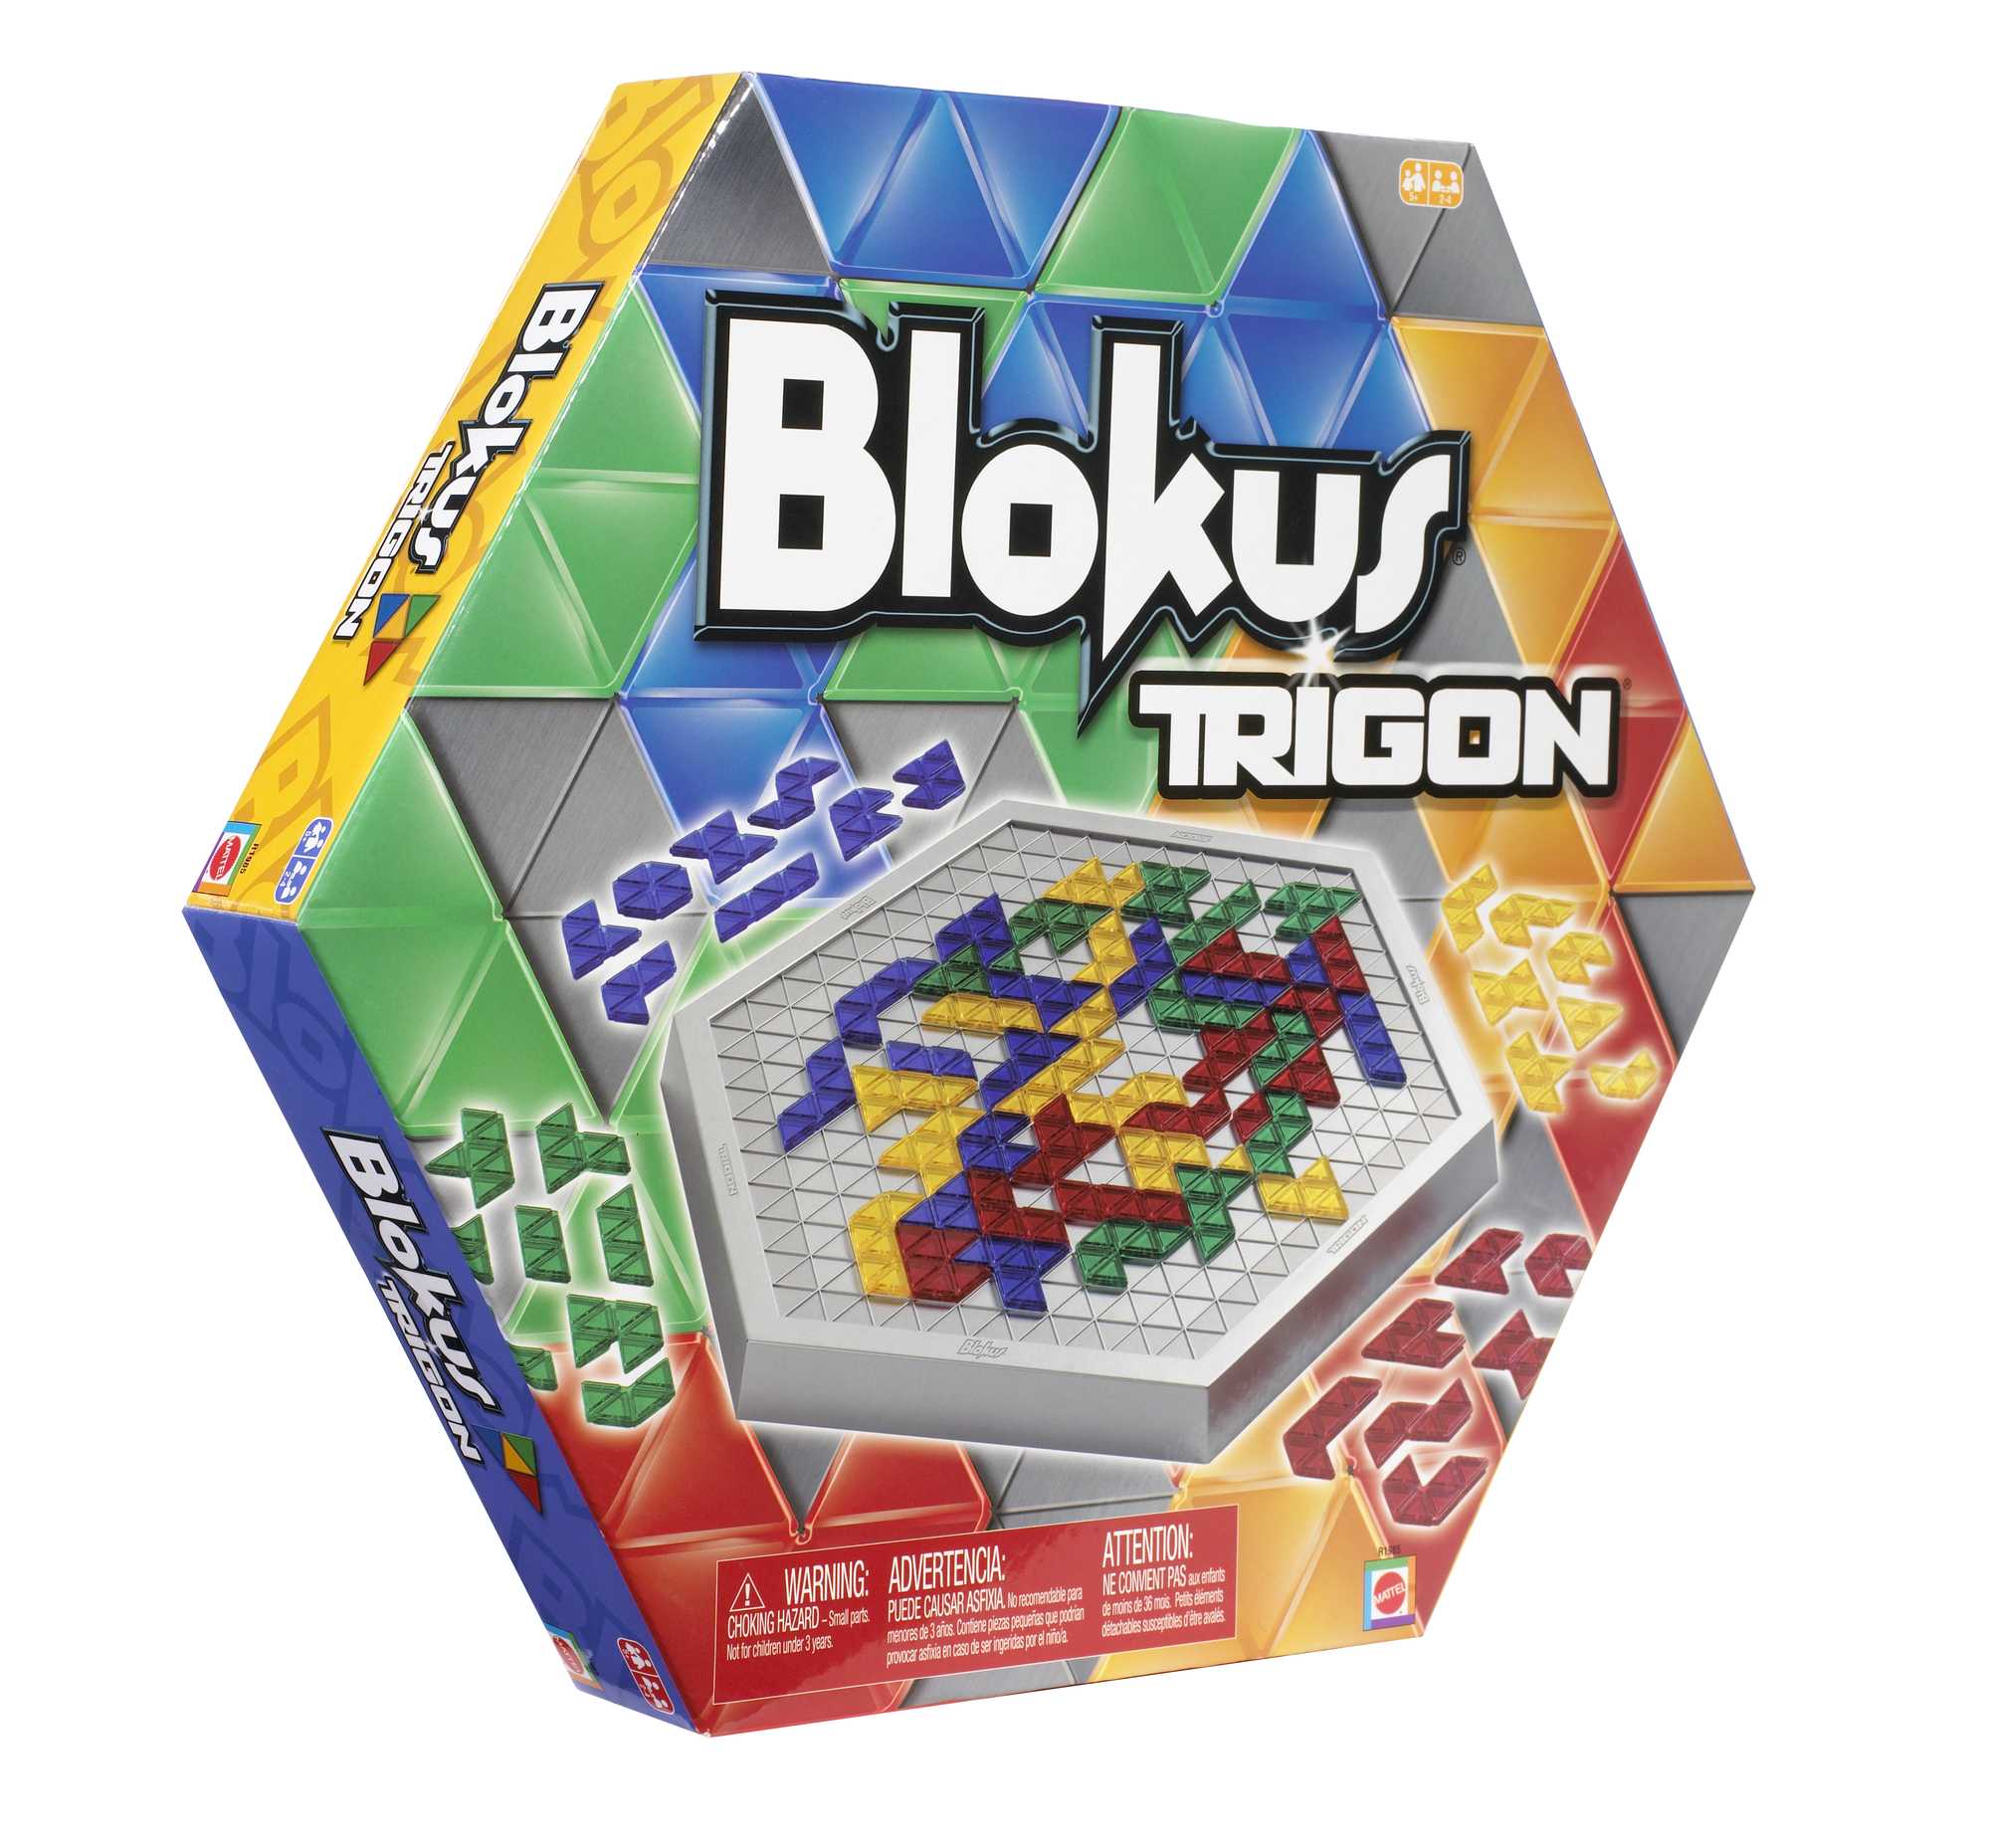 Blokus XL Family Board Games, Brain Games with Large Board and Pieces